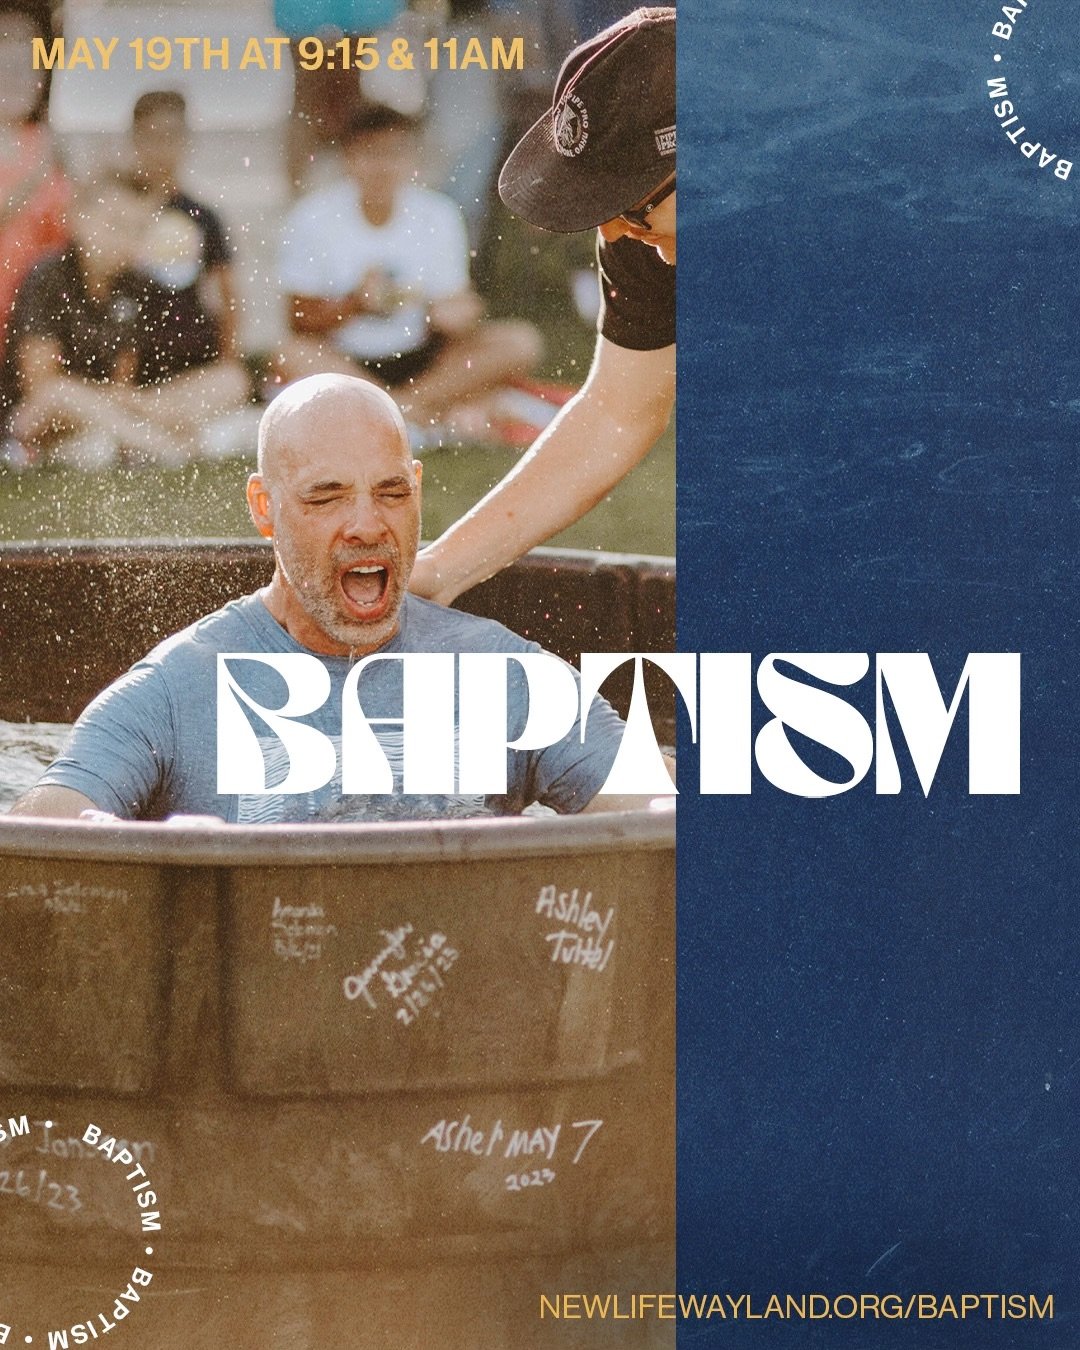 Baptism is 5/19 at both 9:15 + 11am! Are you ready to take the next step in your faith and go PUBLIC for Jesus? We'd love to celebrate with you through this part of your walk with Christ.

Sign up: newlifewayland.org/baptism